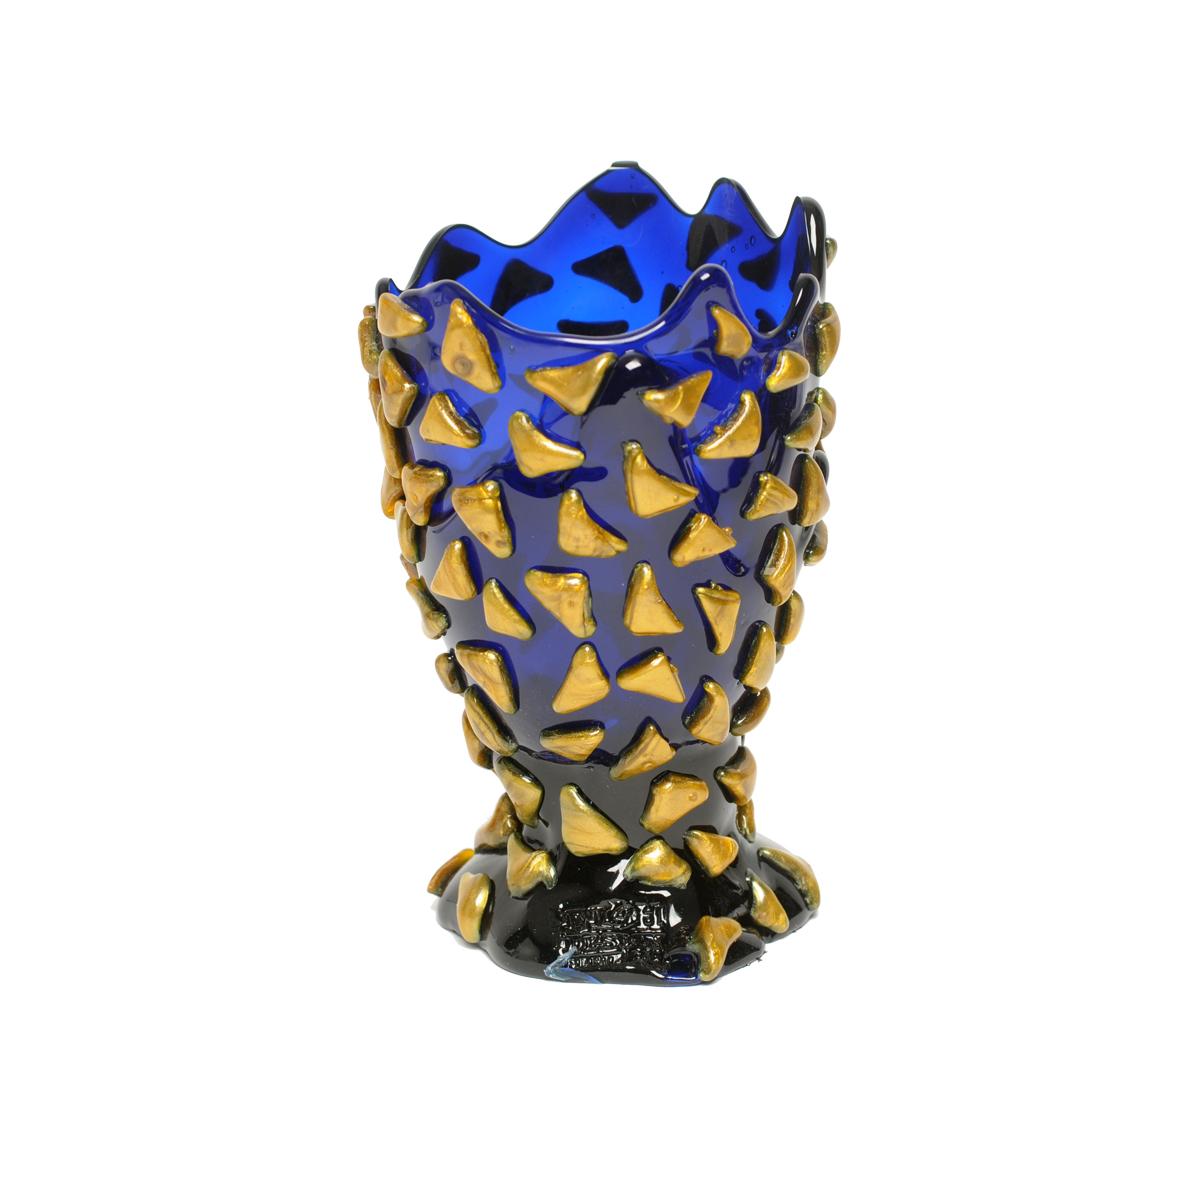 Starry Night vase - Blue and gold.

Vase in soft resin designed by Gaetano Pesce in 1995 for Fish Design collection.

Measures: S - ø 10.5cm x H 19cm

DIMENSIONS AVAILABLE:
S - ø 10.5cm x H 19cm
M - ø 16cm x H 26cm
L - ø 22cm x H 36cm
XL -